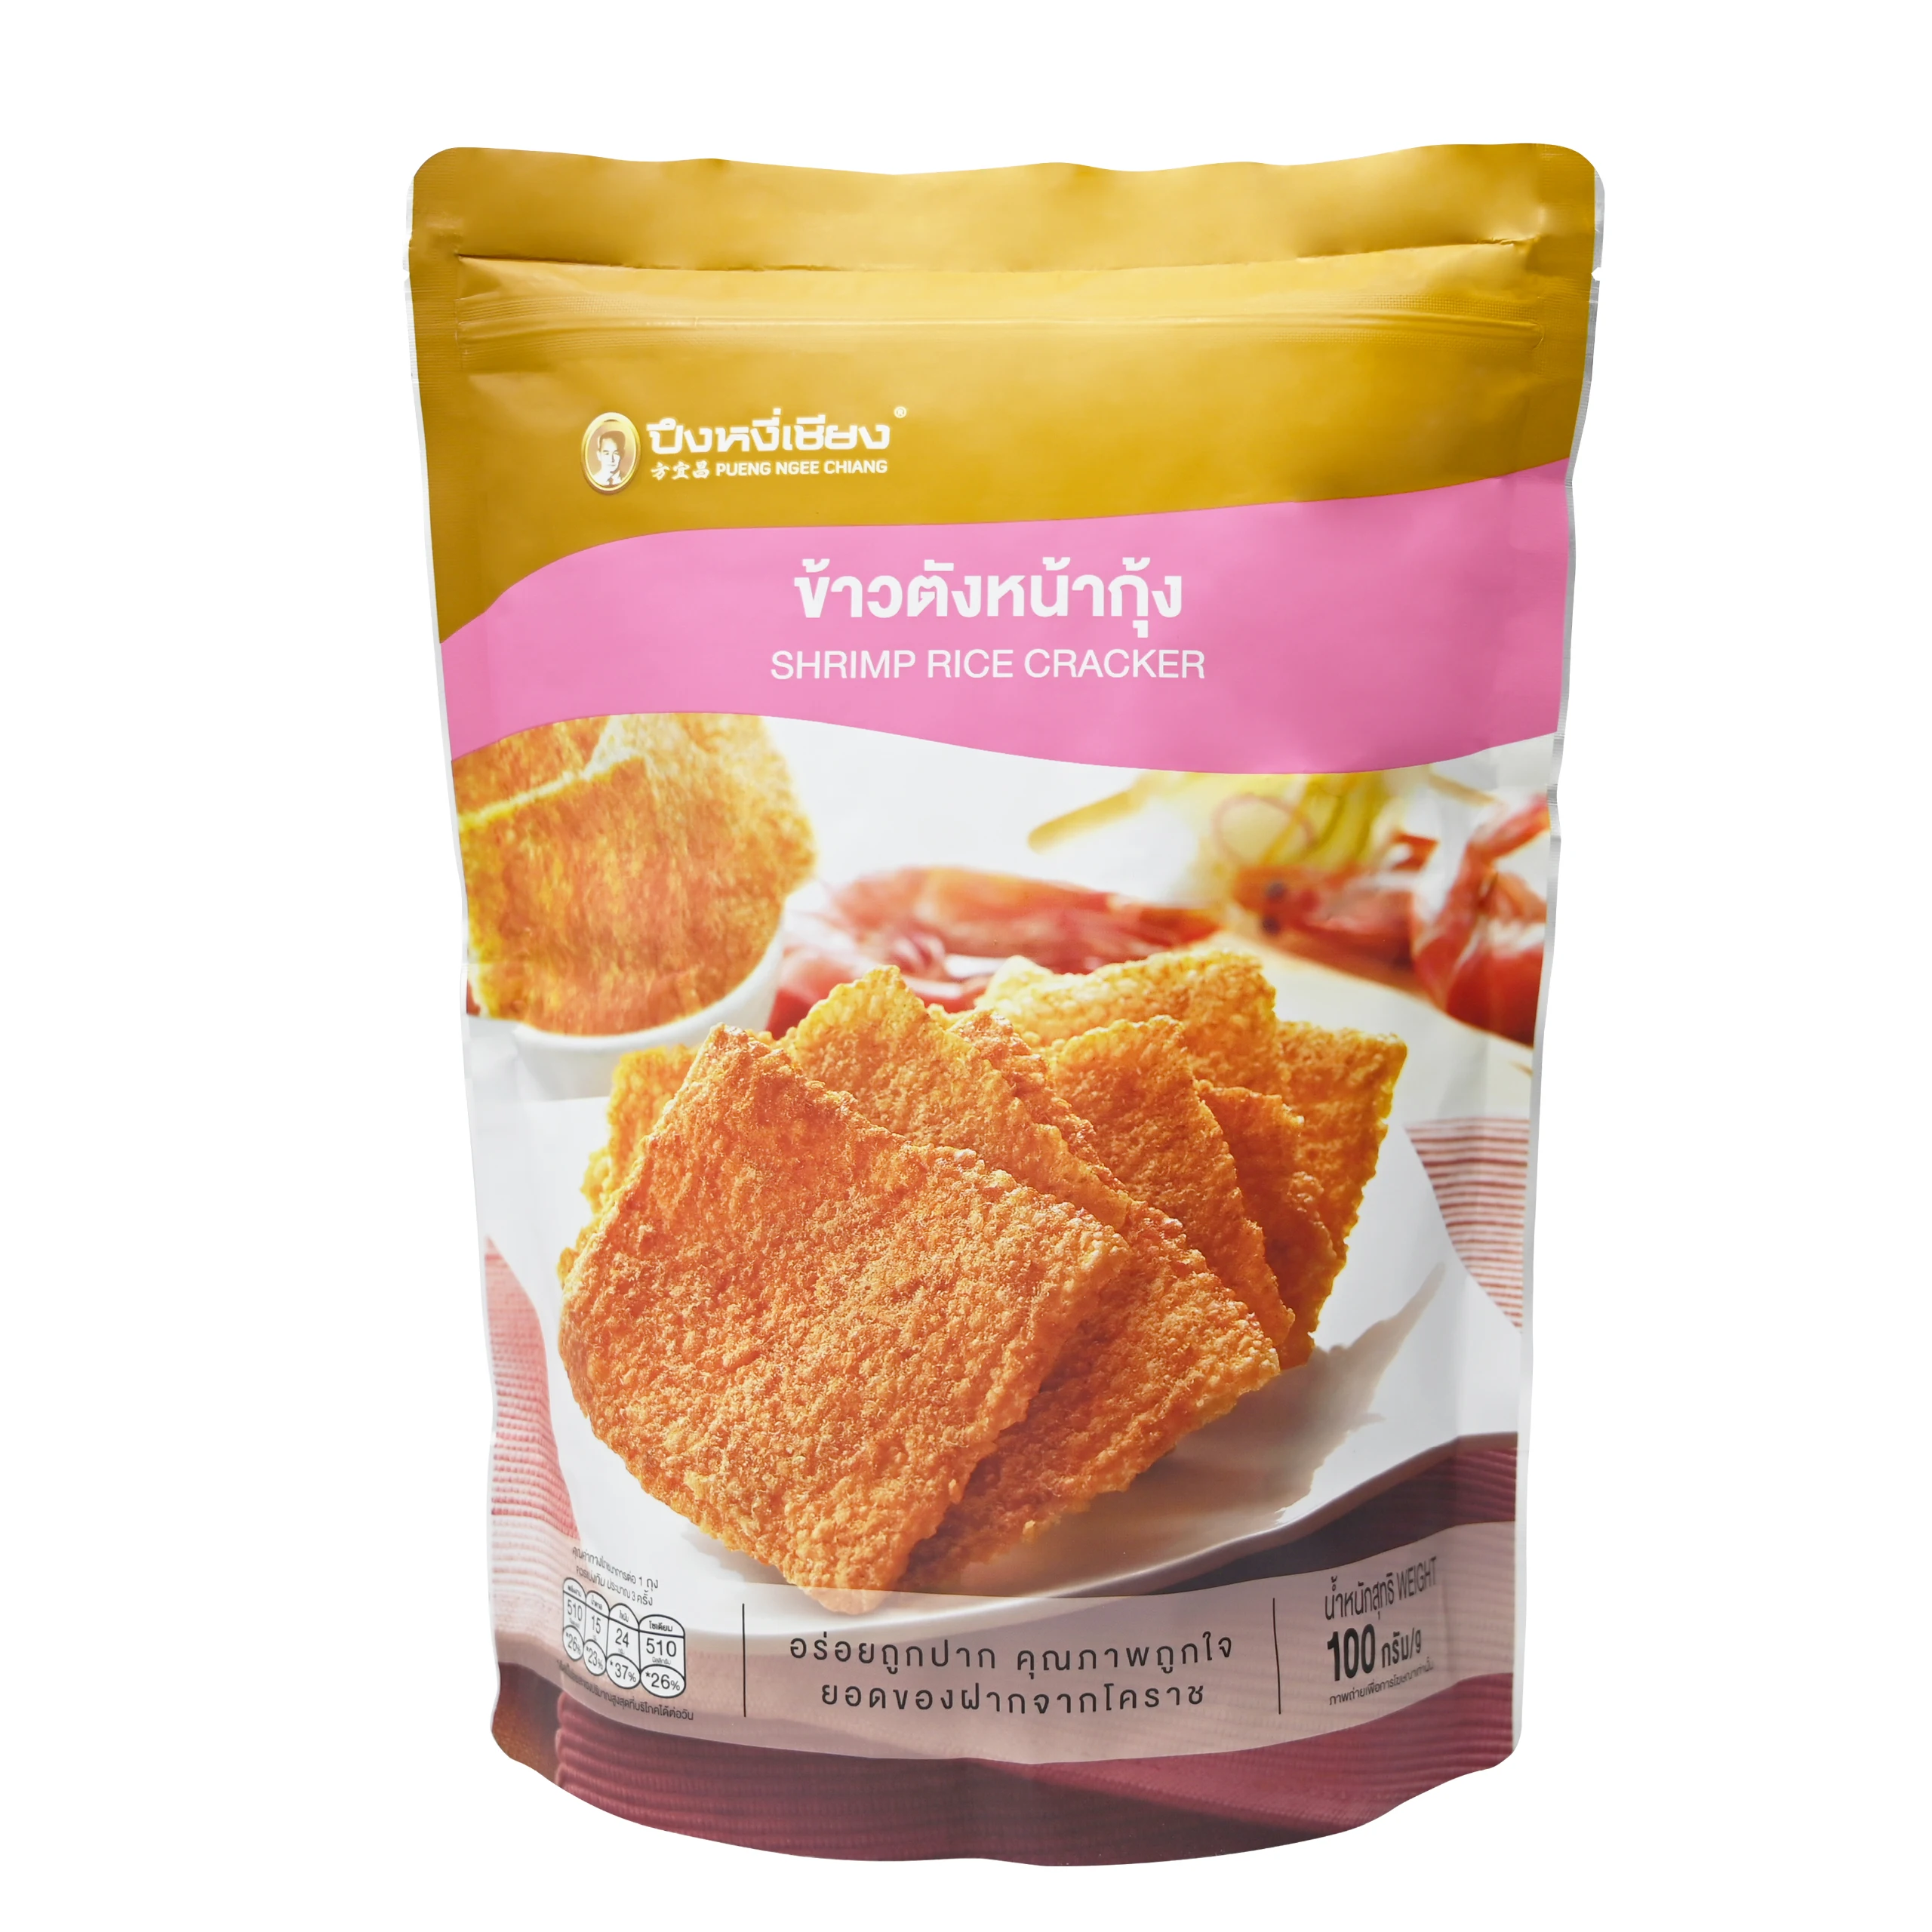 Best Price with High Quality Rice Cracker Snack - with Shrimp flavor Premium Quality Product of Thailand